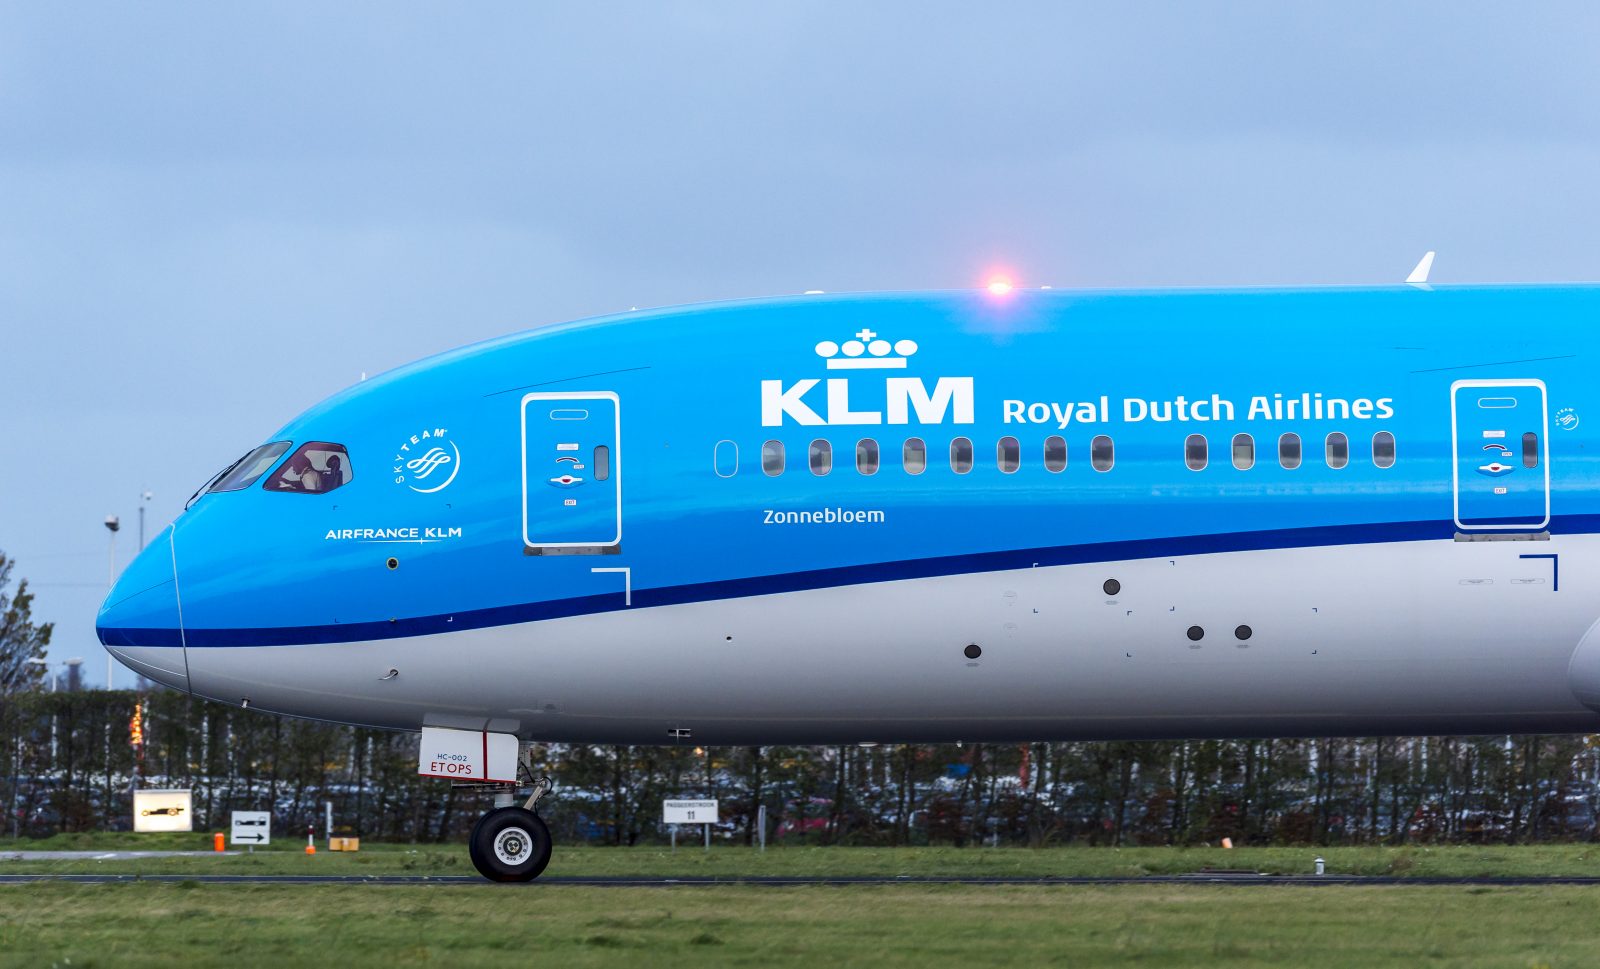 KLM Cabin Crew Are Set to Strike for 24 Hours On 08th January Unless Conditions Are MetKLM Cabin Crew Are Set to Strike for 24 Hours On 08th January Unless Conditions Are Met